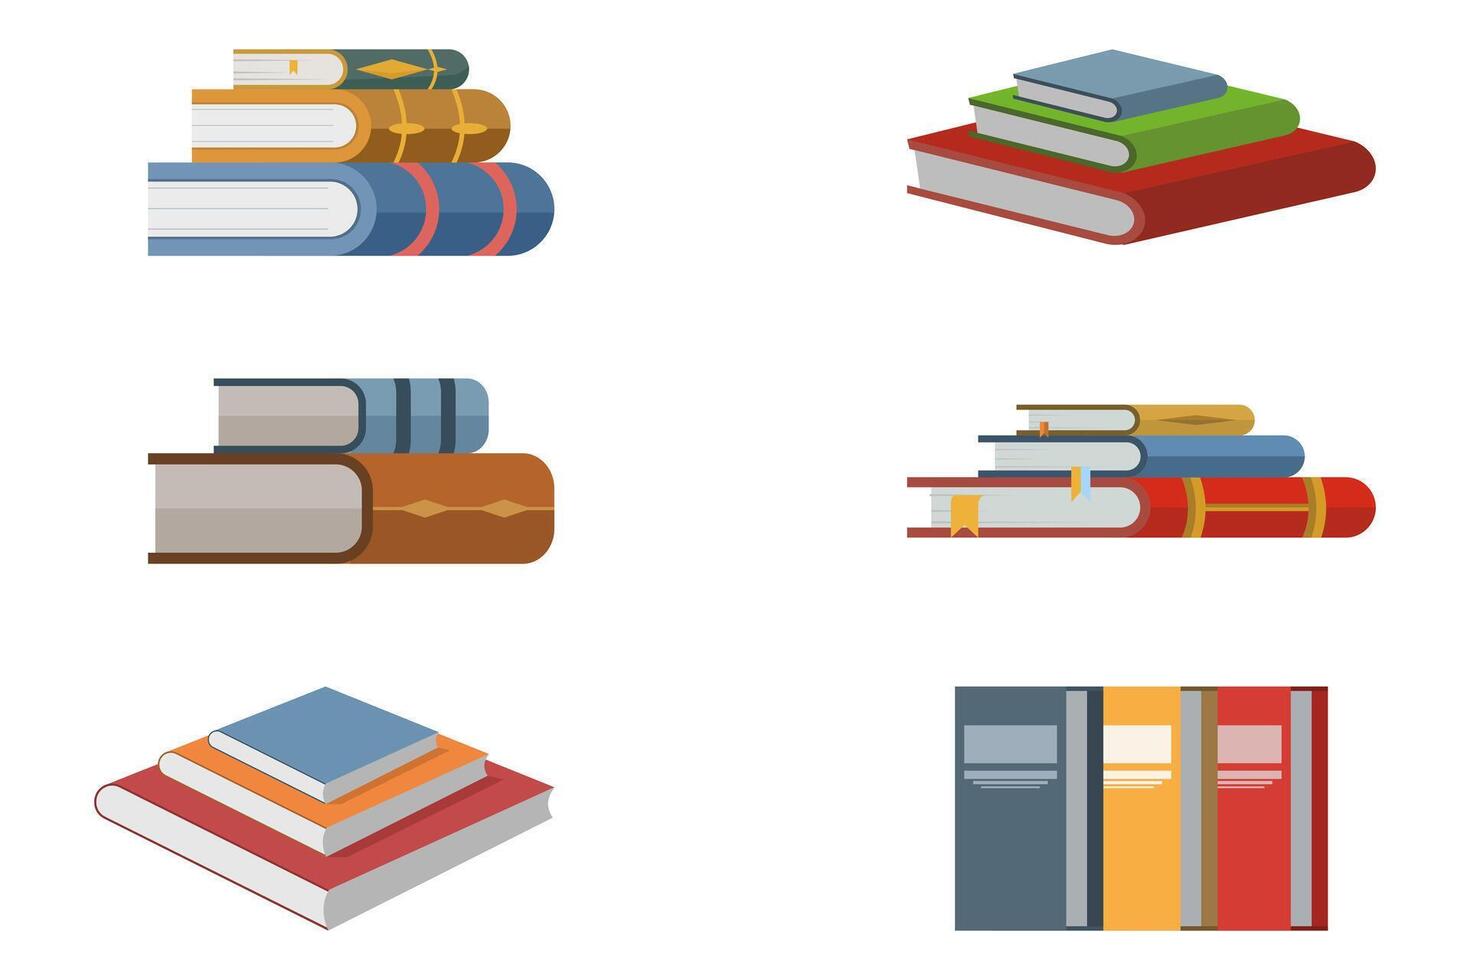 concept of Stack of books for reading, stack of textbooks for education. Literature collection, dictionary, encyclopedia, planner with bookmarks. Flat vector illustration on white background.